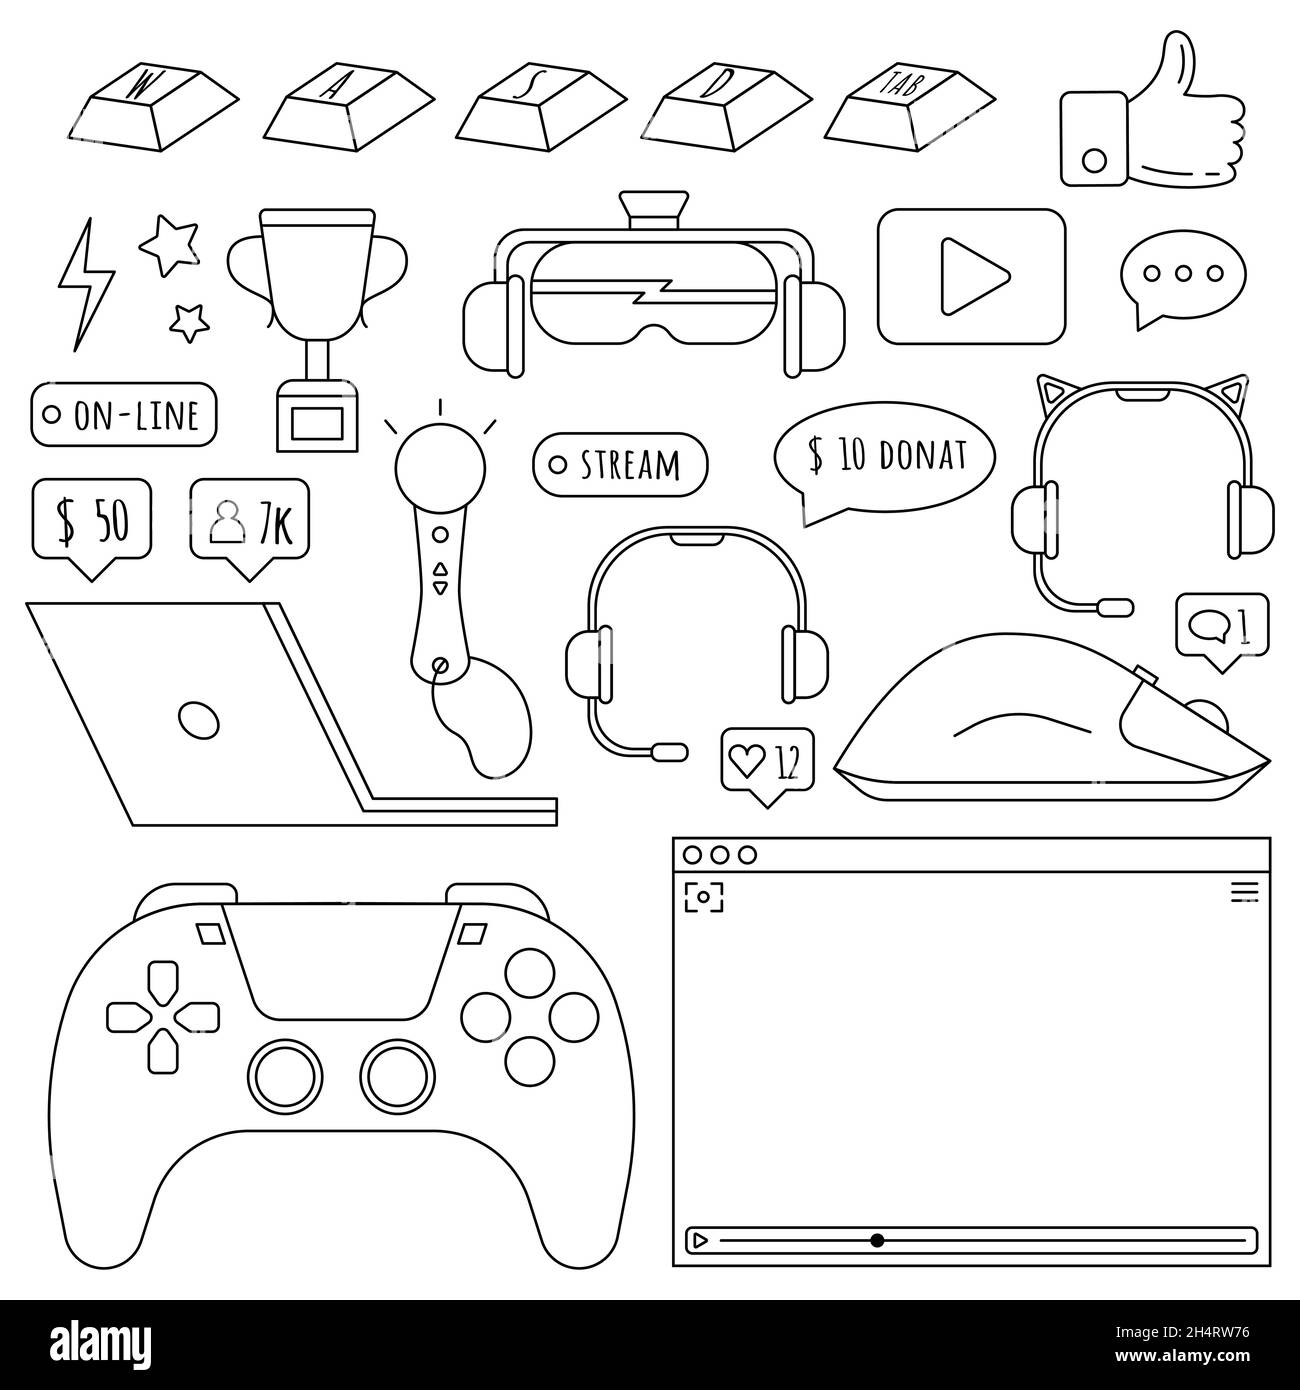 Video game streamer line icon set in a flat style, isolated on a white background. Laptop, mouse, keyboard, headphones, VR glasses, and gamepad icon. Stock Vector